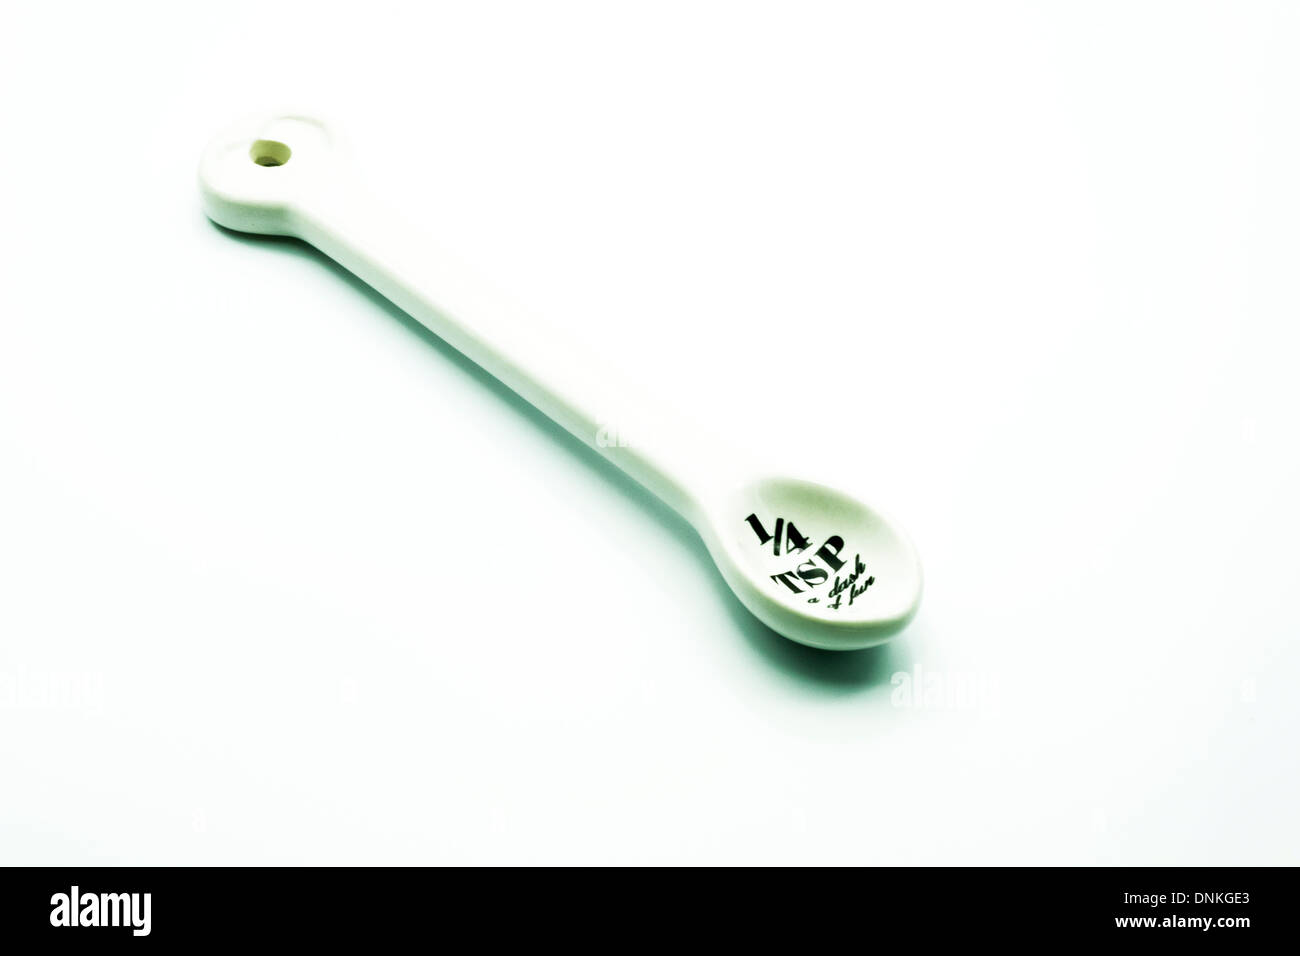 https://c8.alamy.com/comp/DNKGE3/measuring-spoon-quarter-teaspoon-for-cooking-cut-out-white-background-DNKGE3.jpg